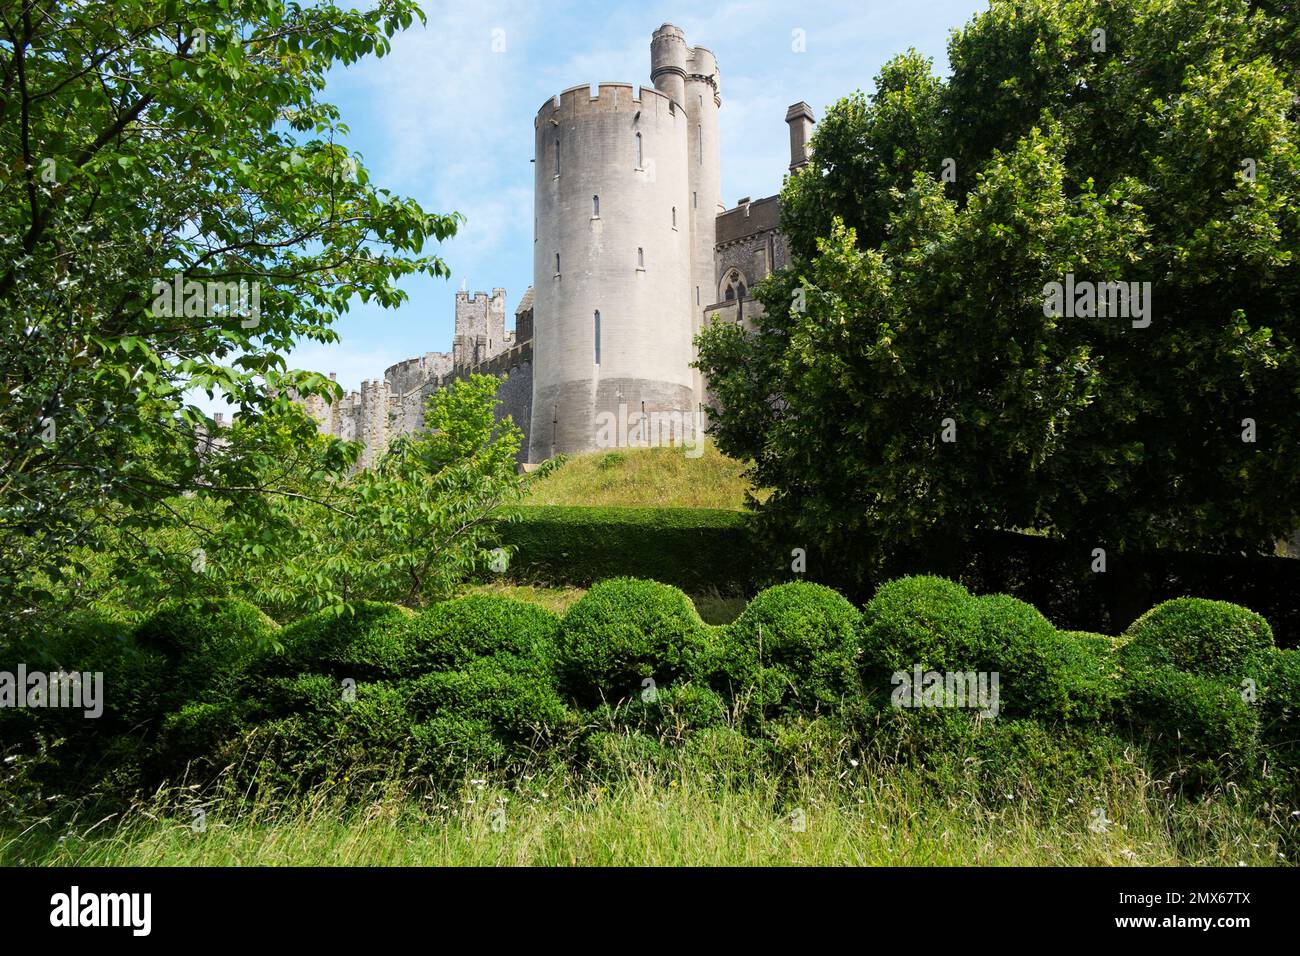 The Japanese art of cloud pruning known as Niwaki, has been used to shape the box hedging in the grounds around Arundel Castle, West Sussex, UK Stock Photo